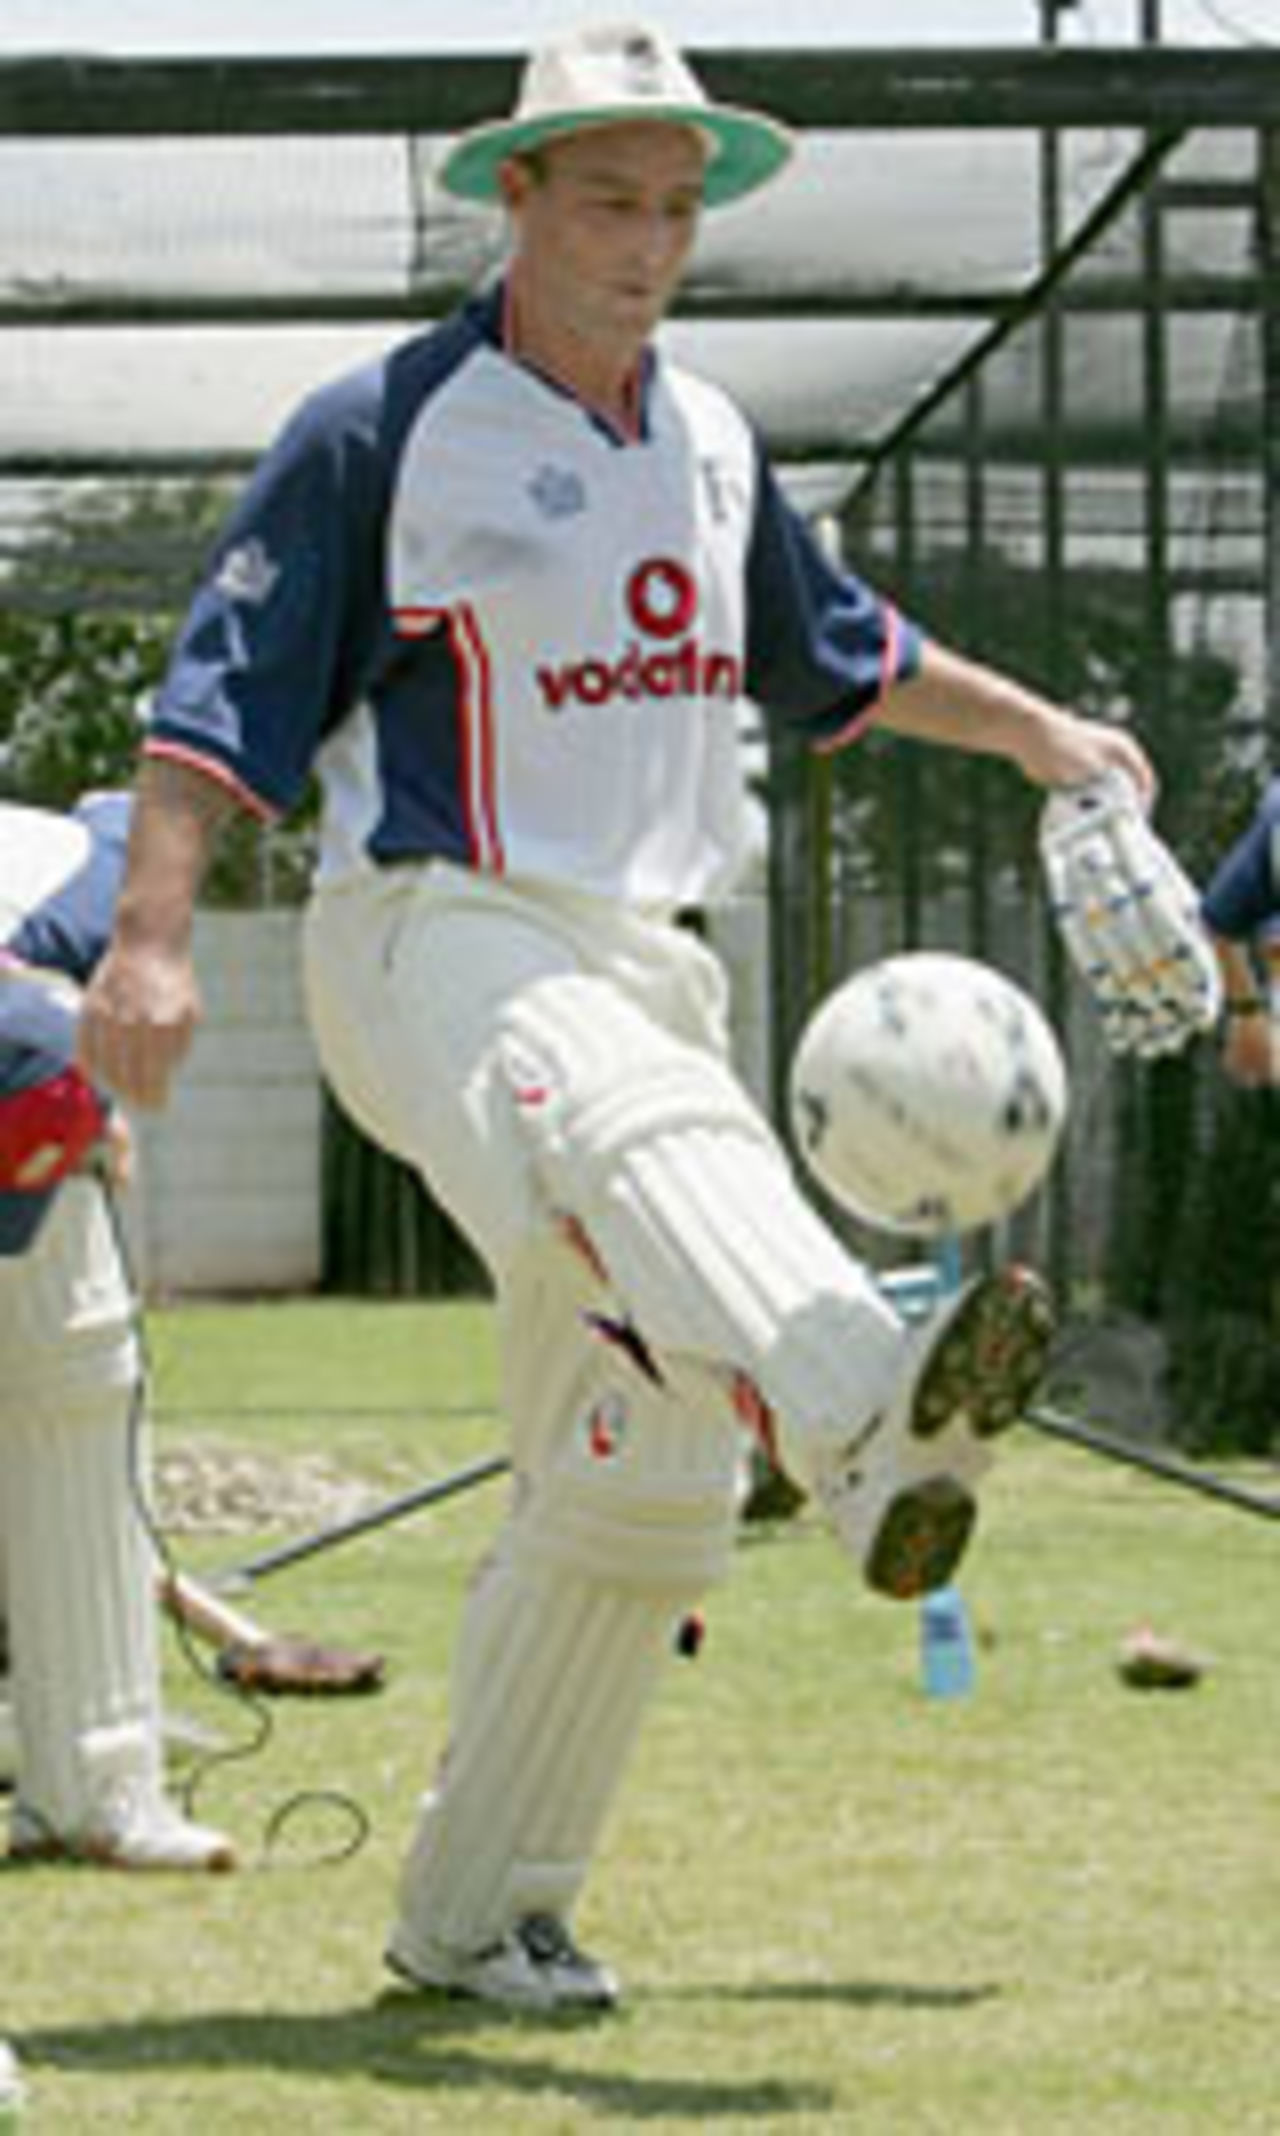 Graham Thorpe at work in the nets, Durban, December 24 2004